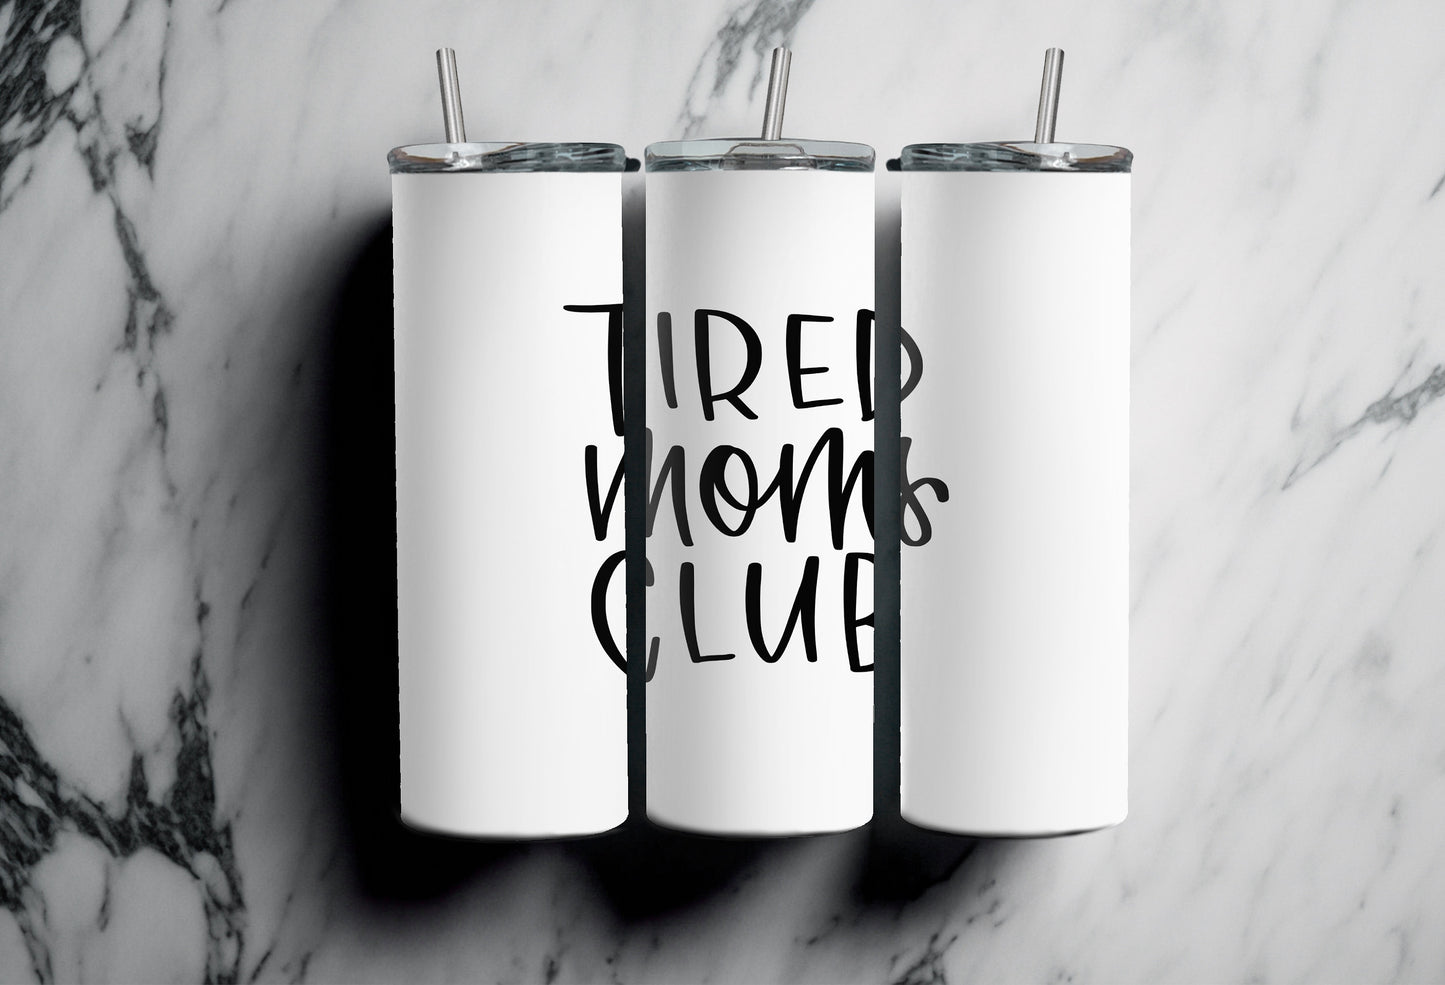 Tired moms club